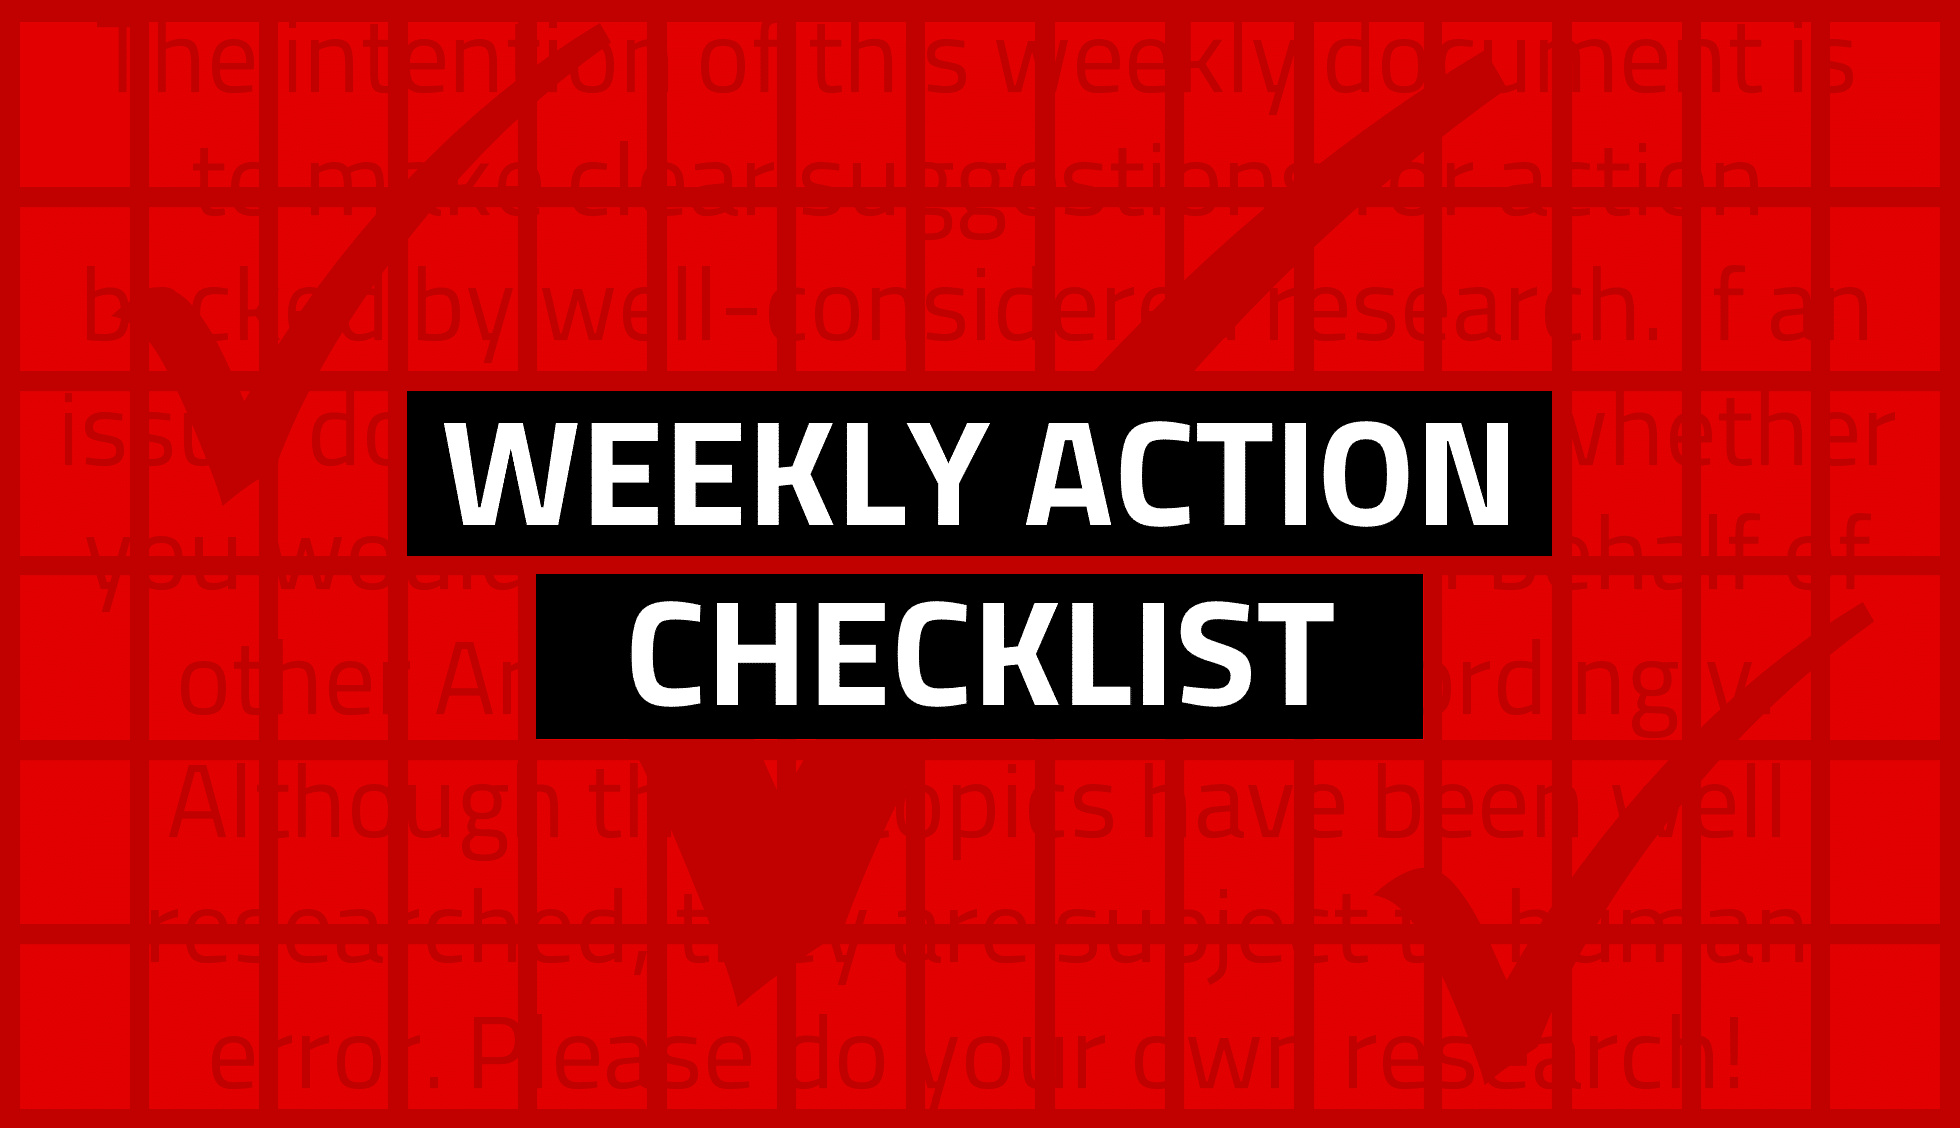 What to Do This Week of January 29, 2017